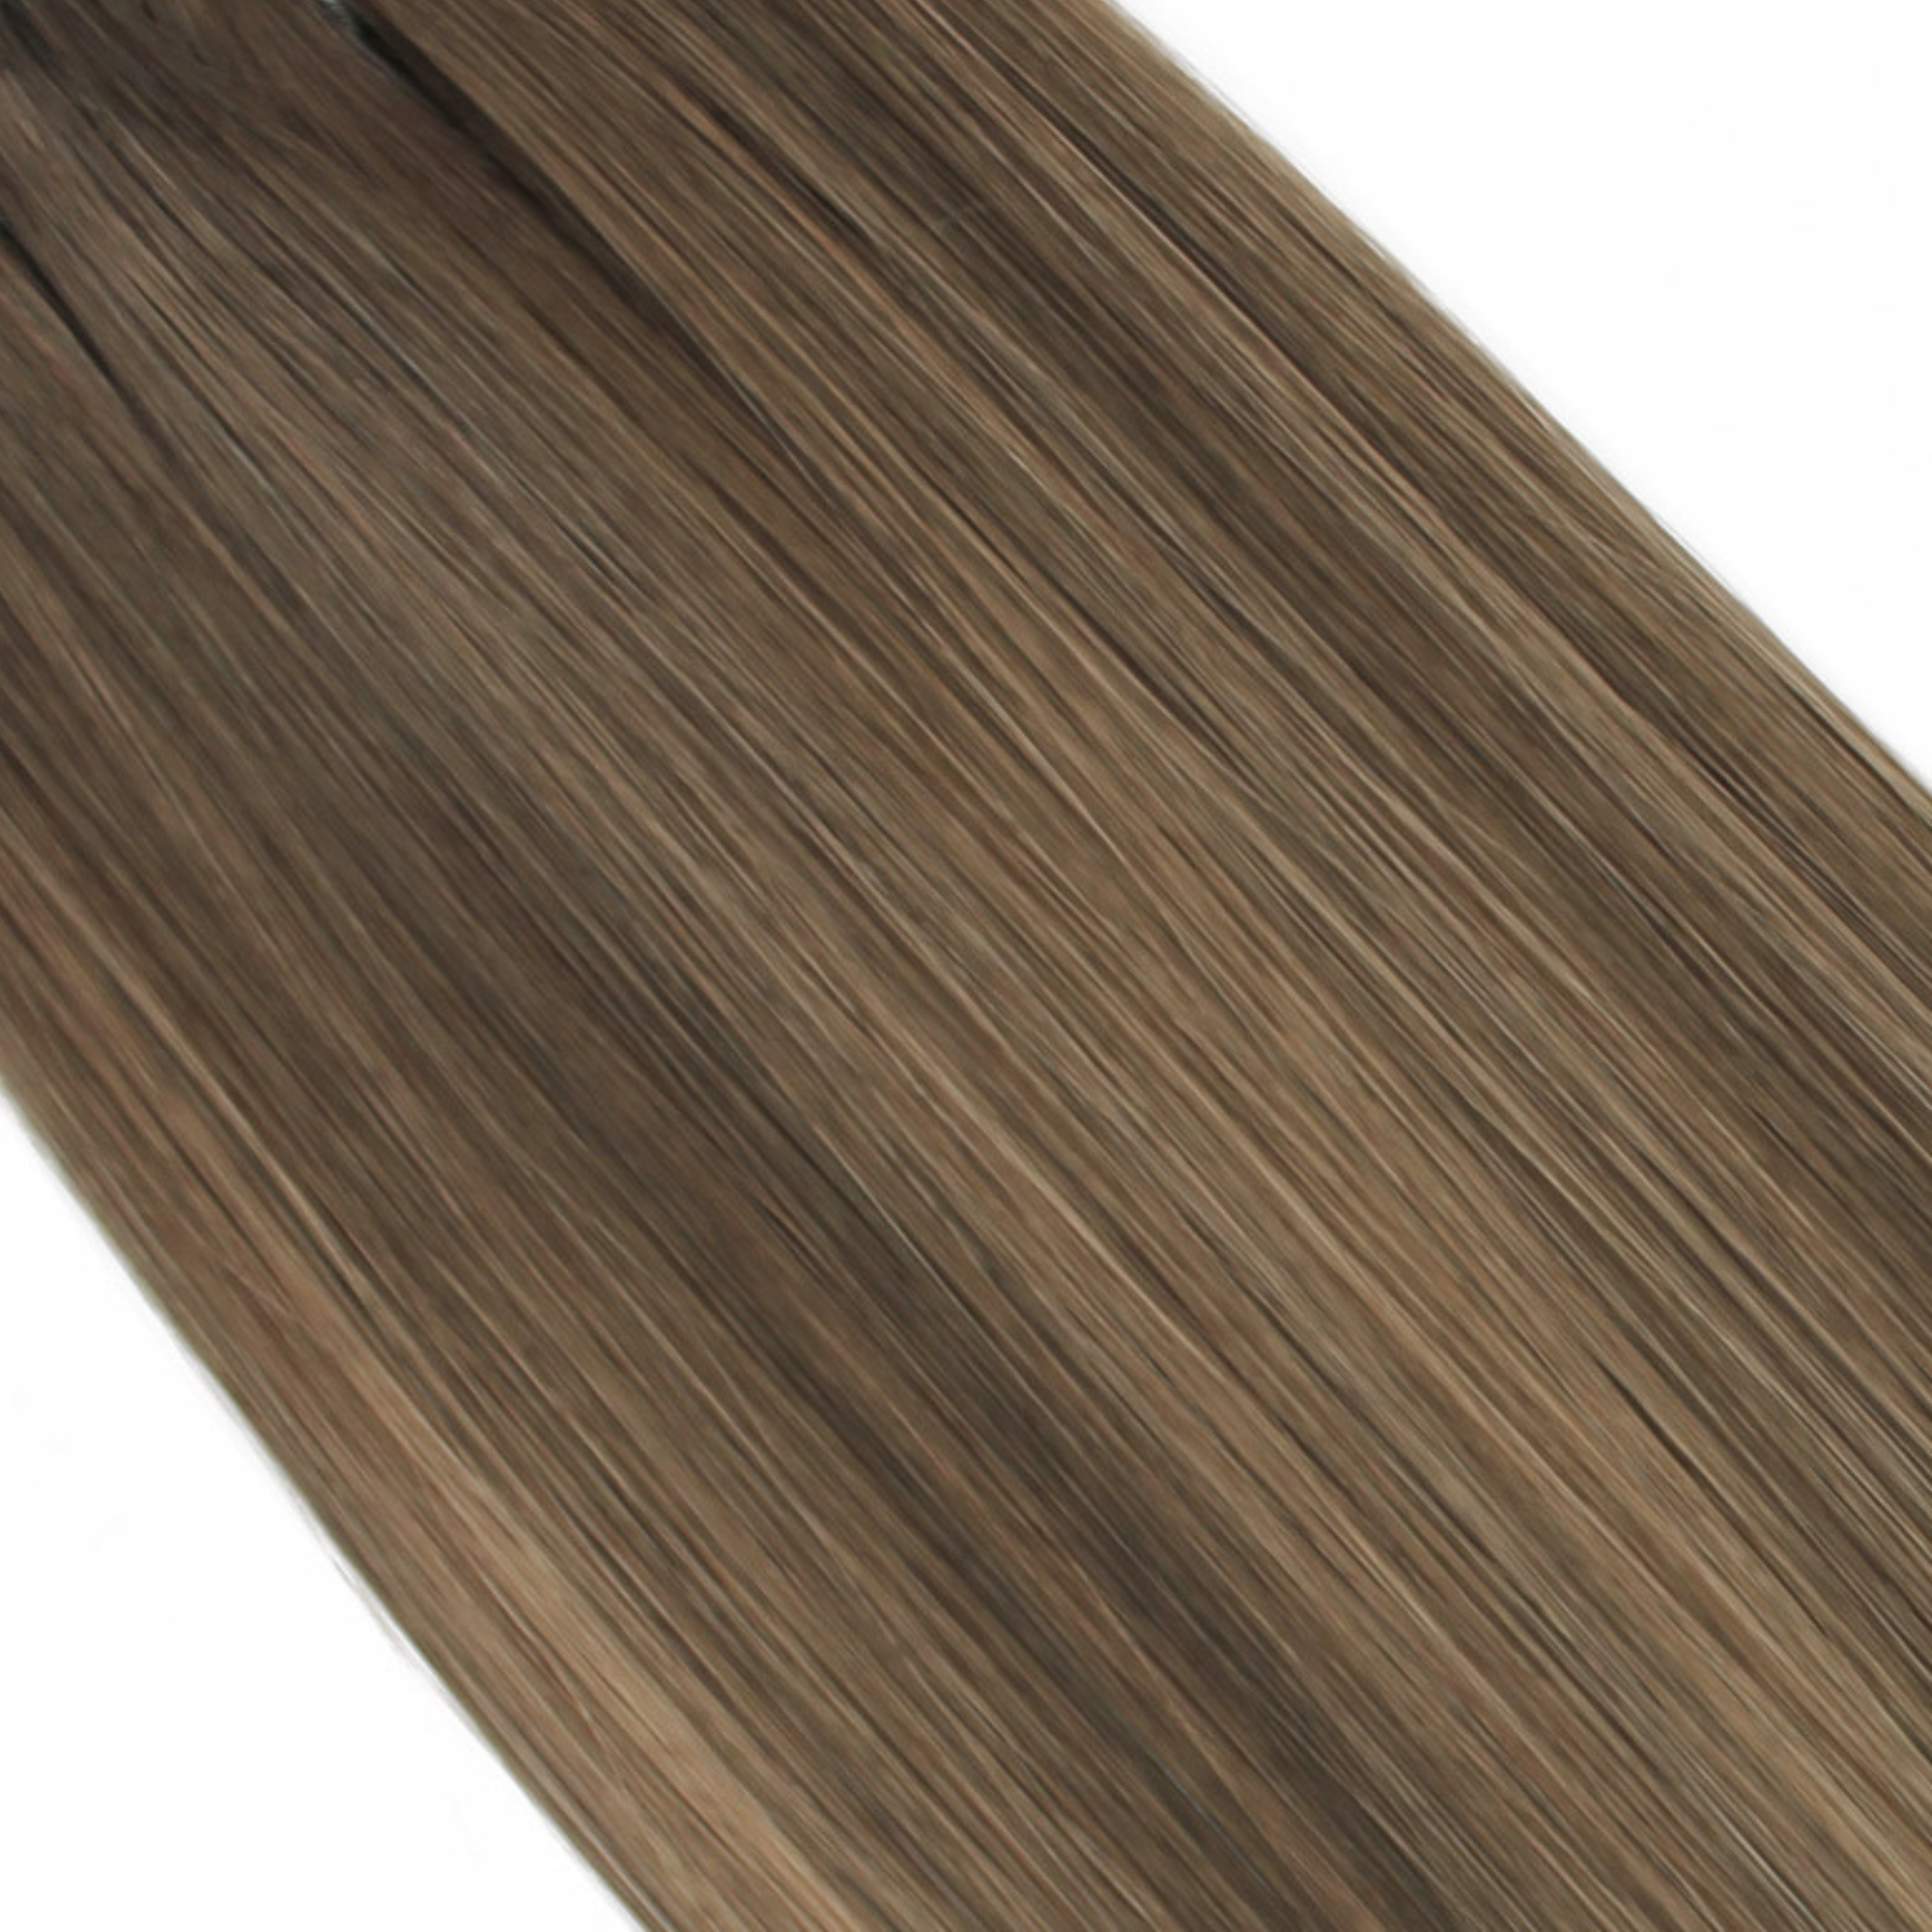 "hair rehab london 22" tape hair extensions shade swatch titled rooted caramel"